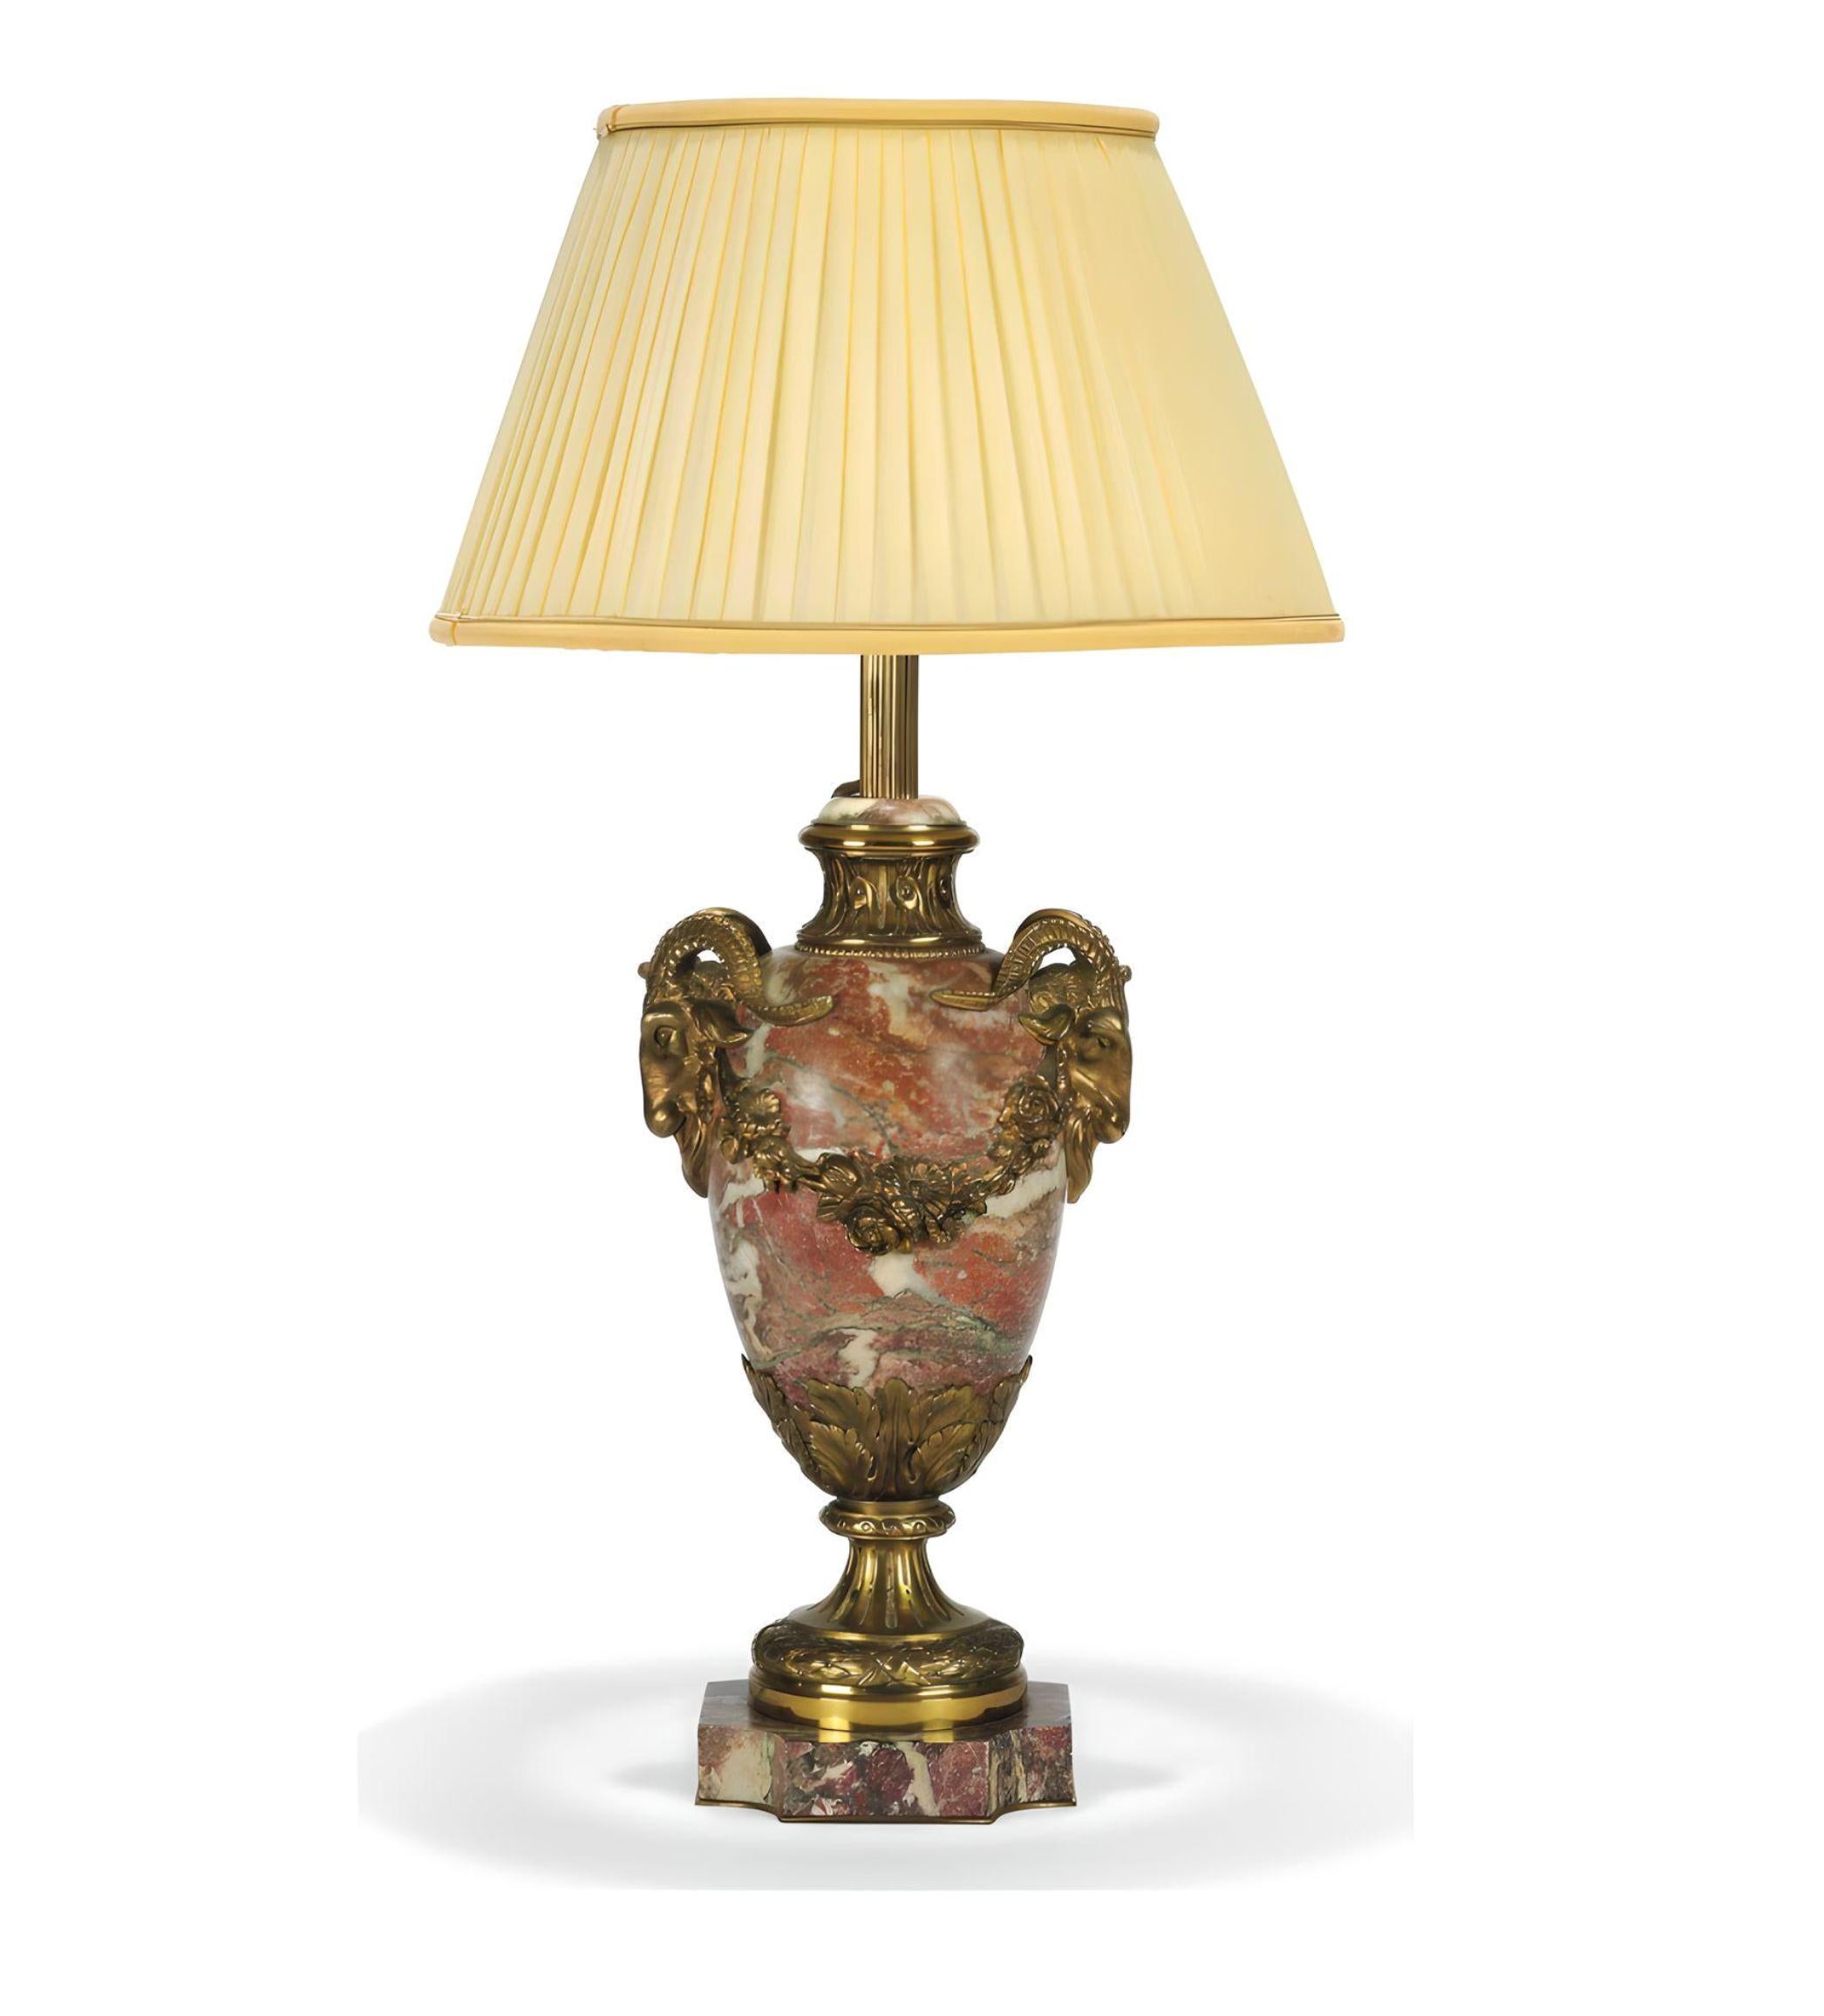 Gilt-Bronze-Mounted Marble Table Lamp, Early 20th century. Extremely well made with finest materials.

The urn body with twin ram's-mask handles on a square base with re-entrant corners, fitted for electricity, with new custom made shade.

This lamp